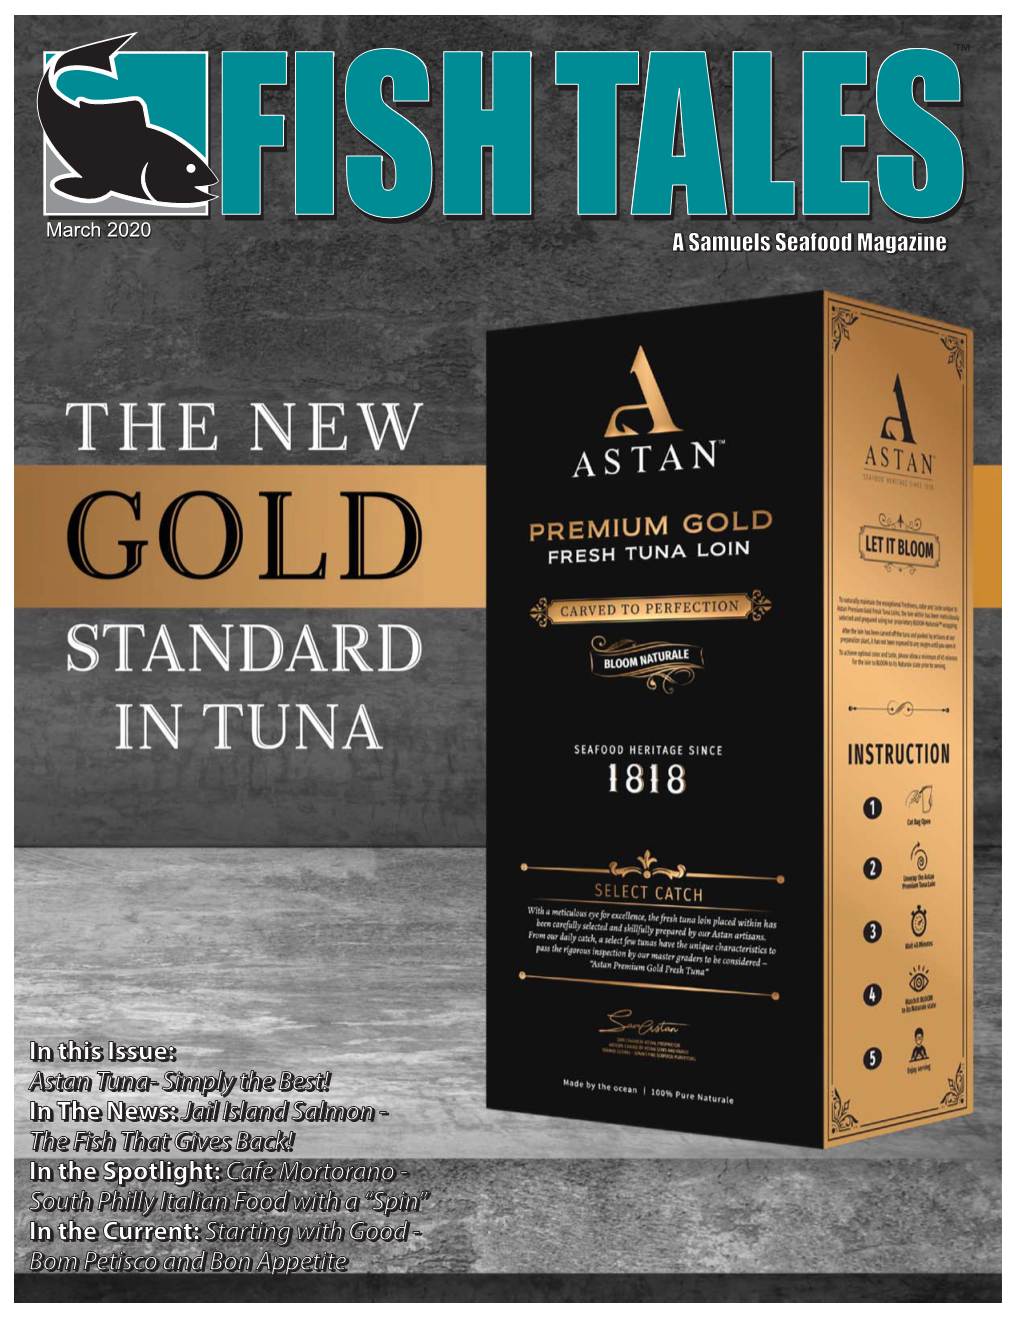 In This Issue: Astan Tuna- Simply the Best! in the News: Jail Island